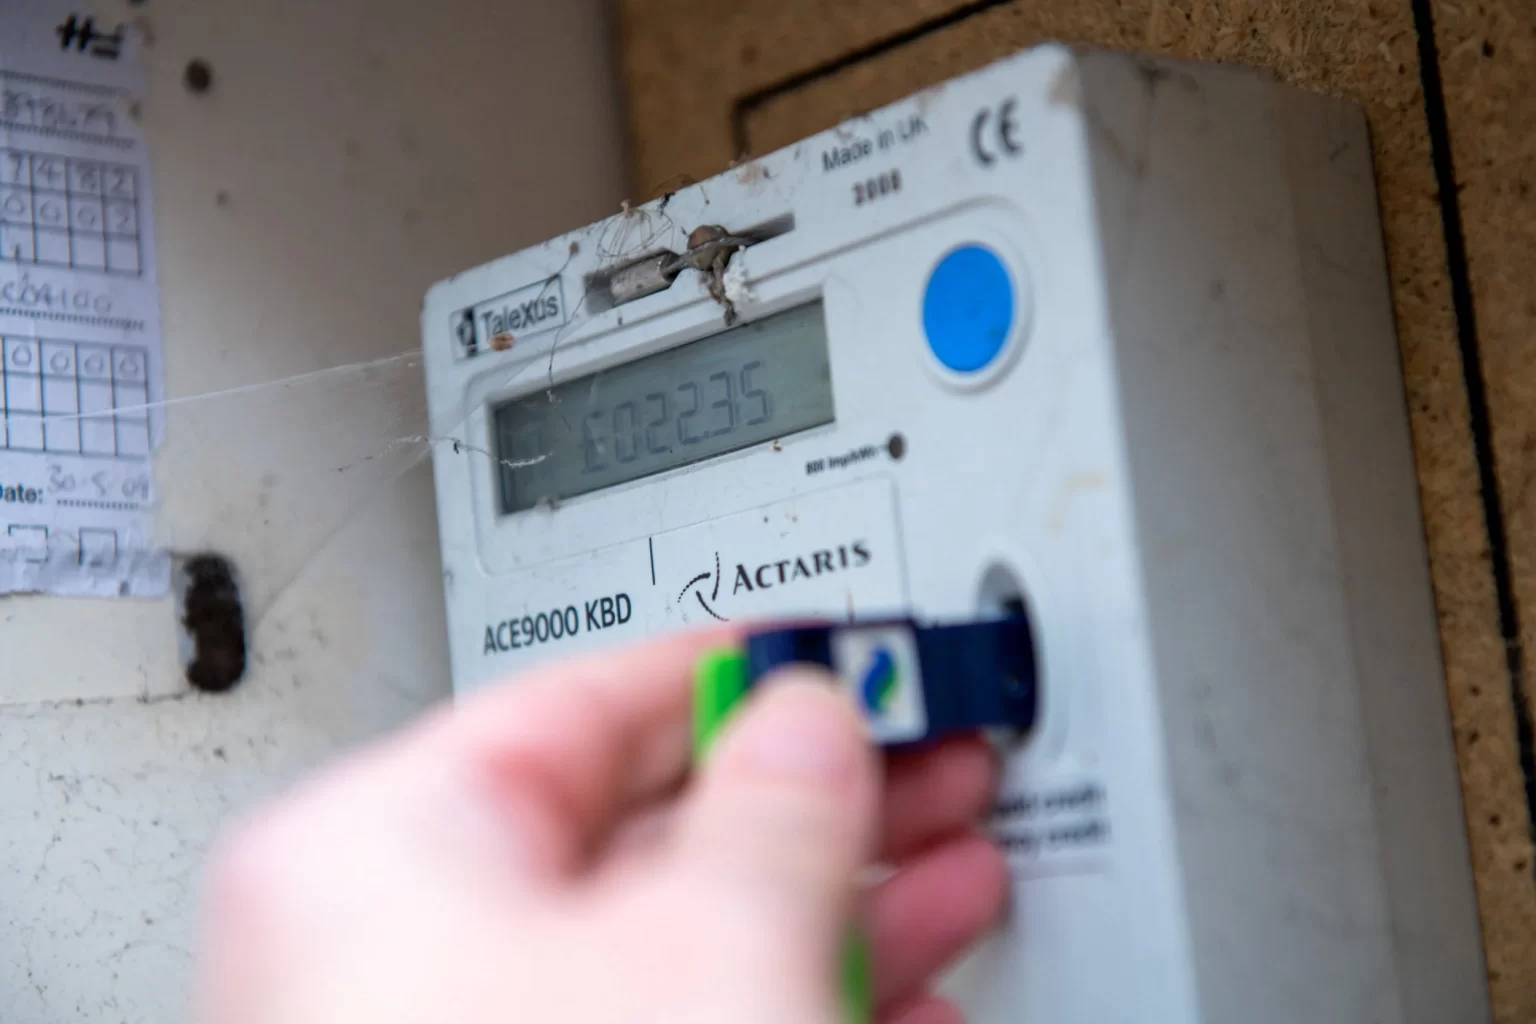 Energy firms can force fit prepayment meters again